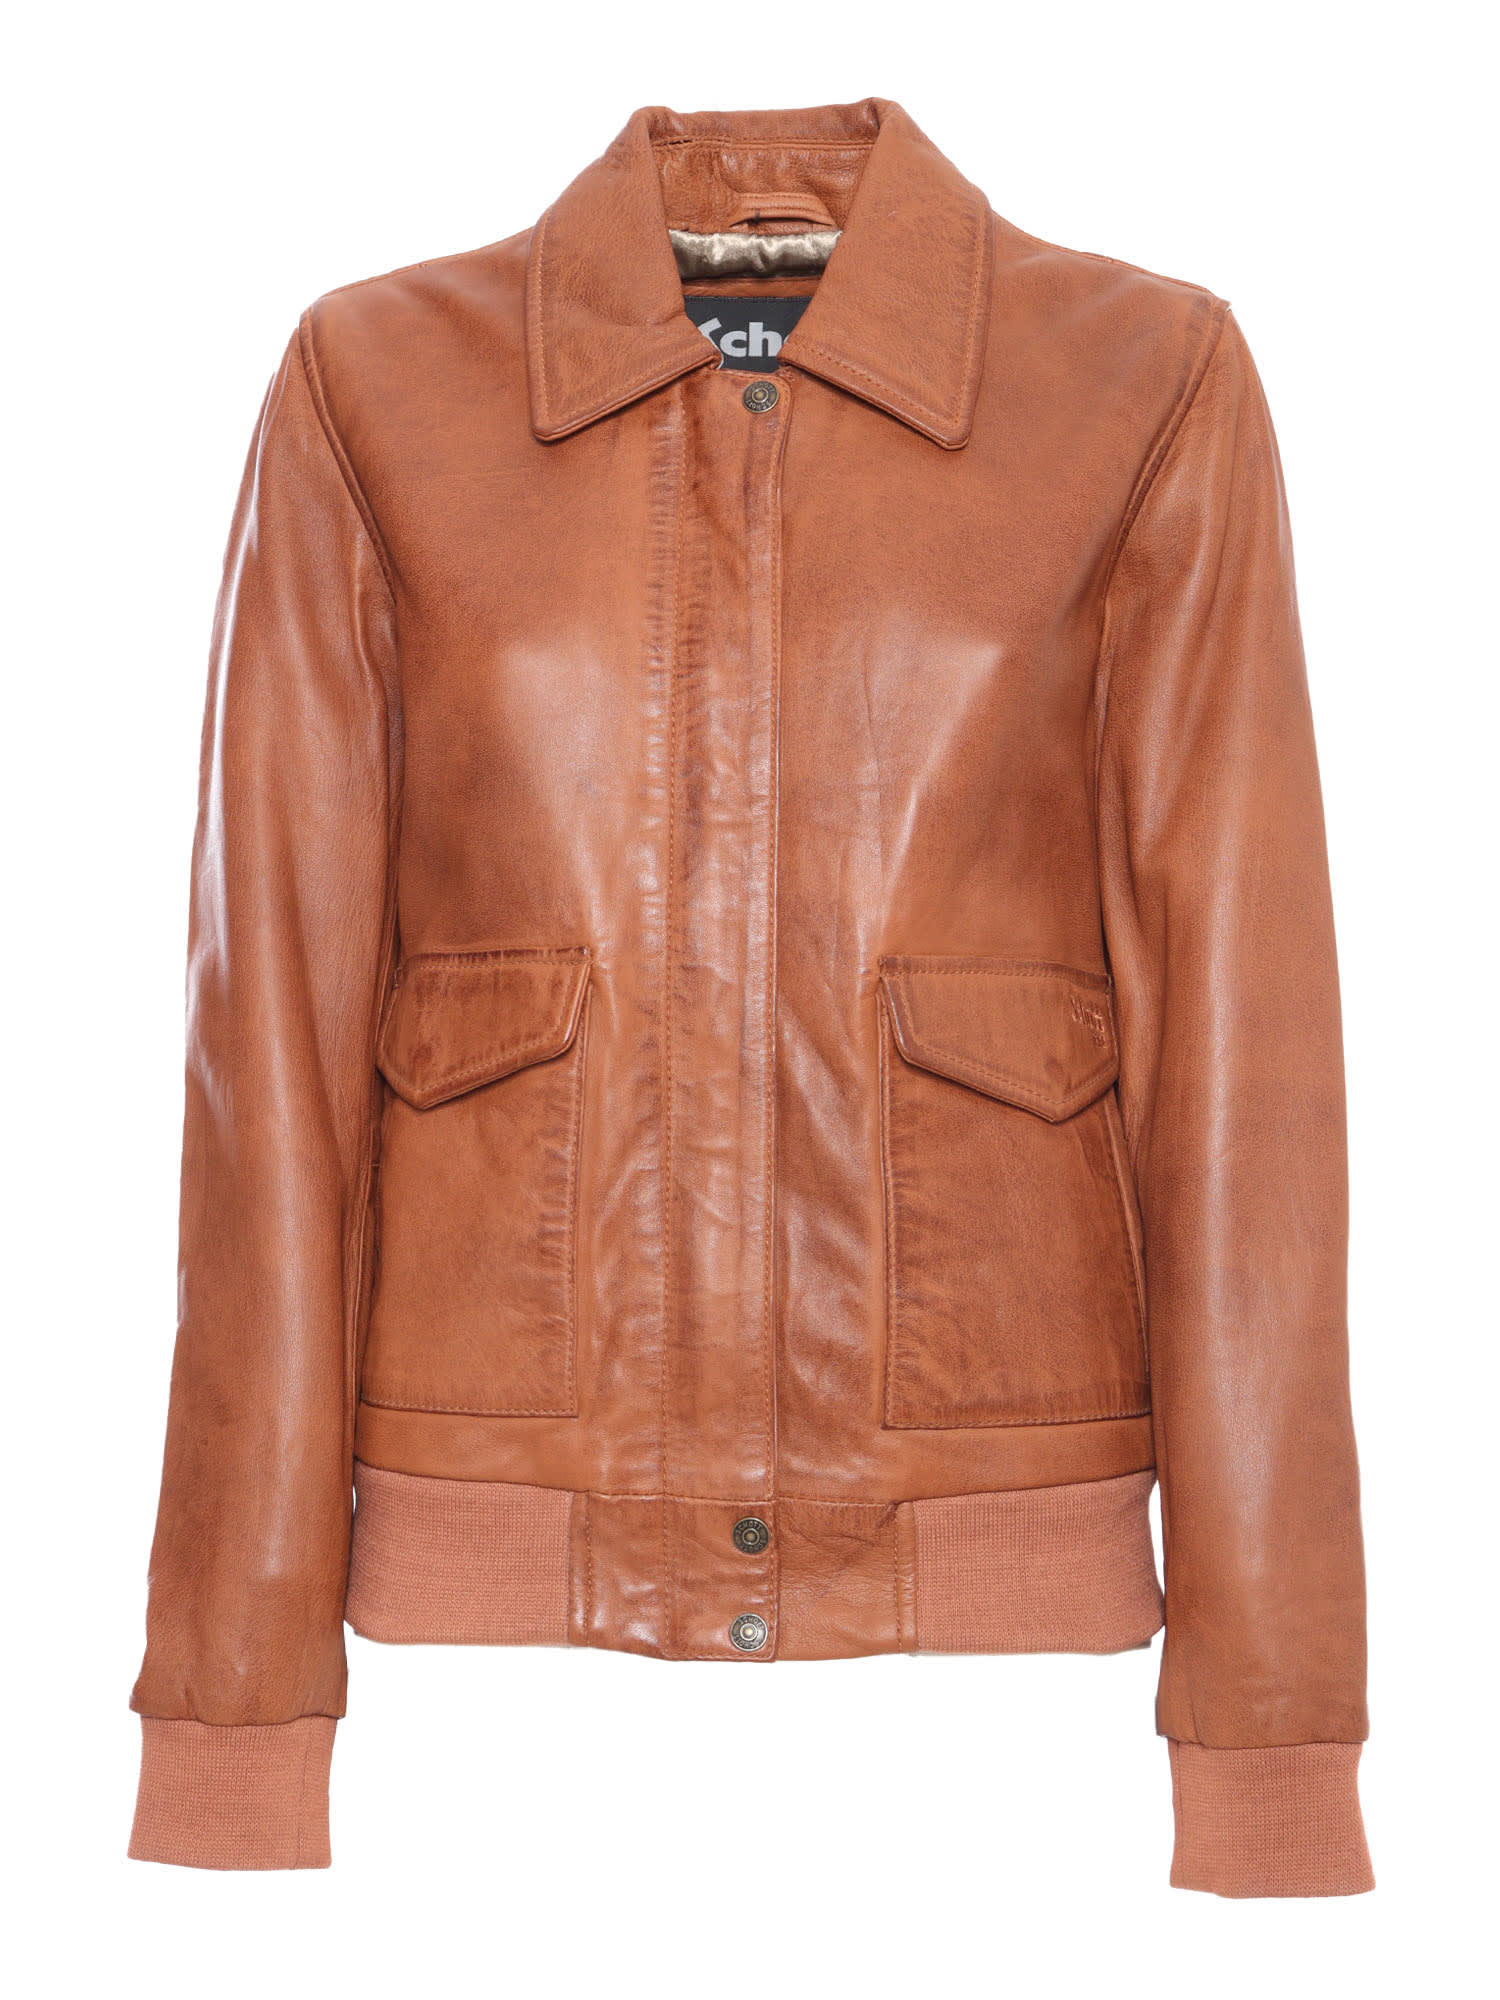 Camel Colored Leather Jacket